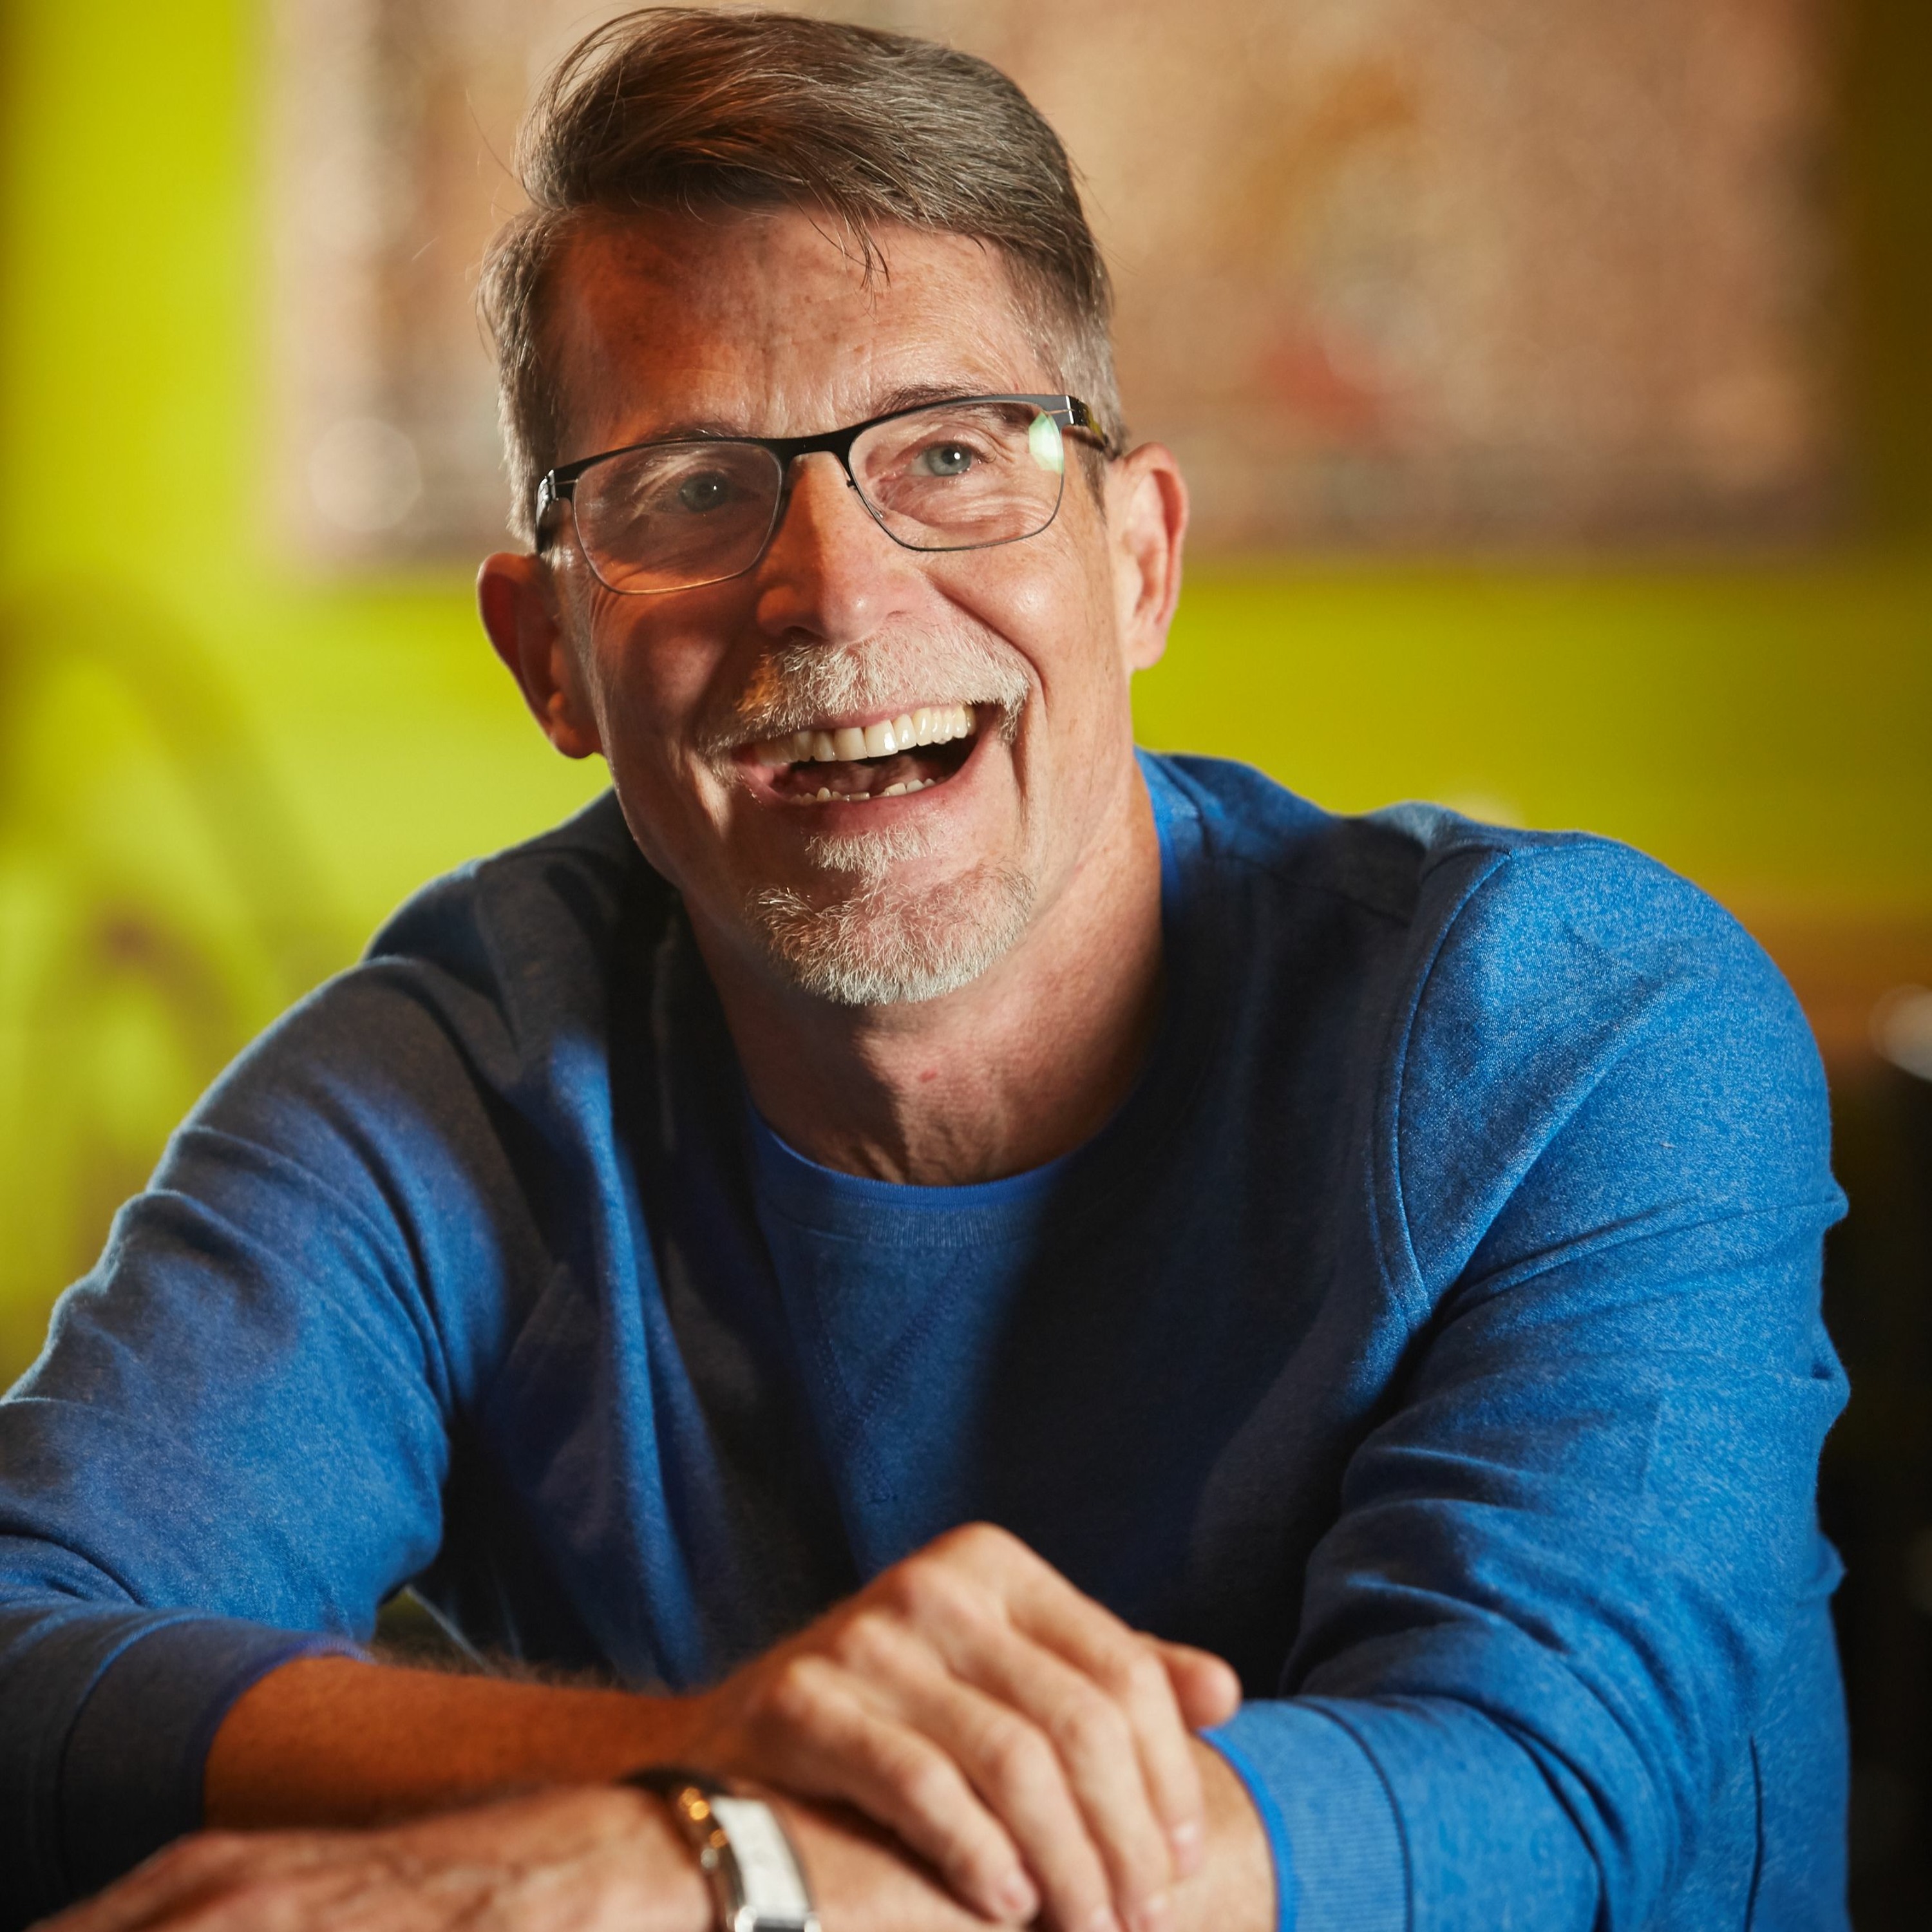 065 AgEmerge Podcast with Chef Rick Bayless cover art